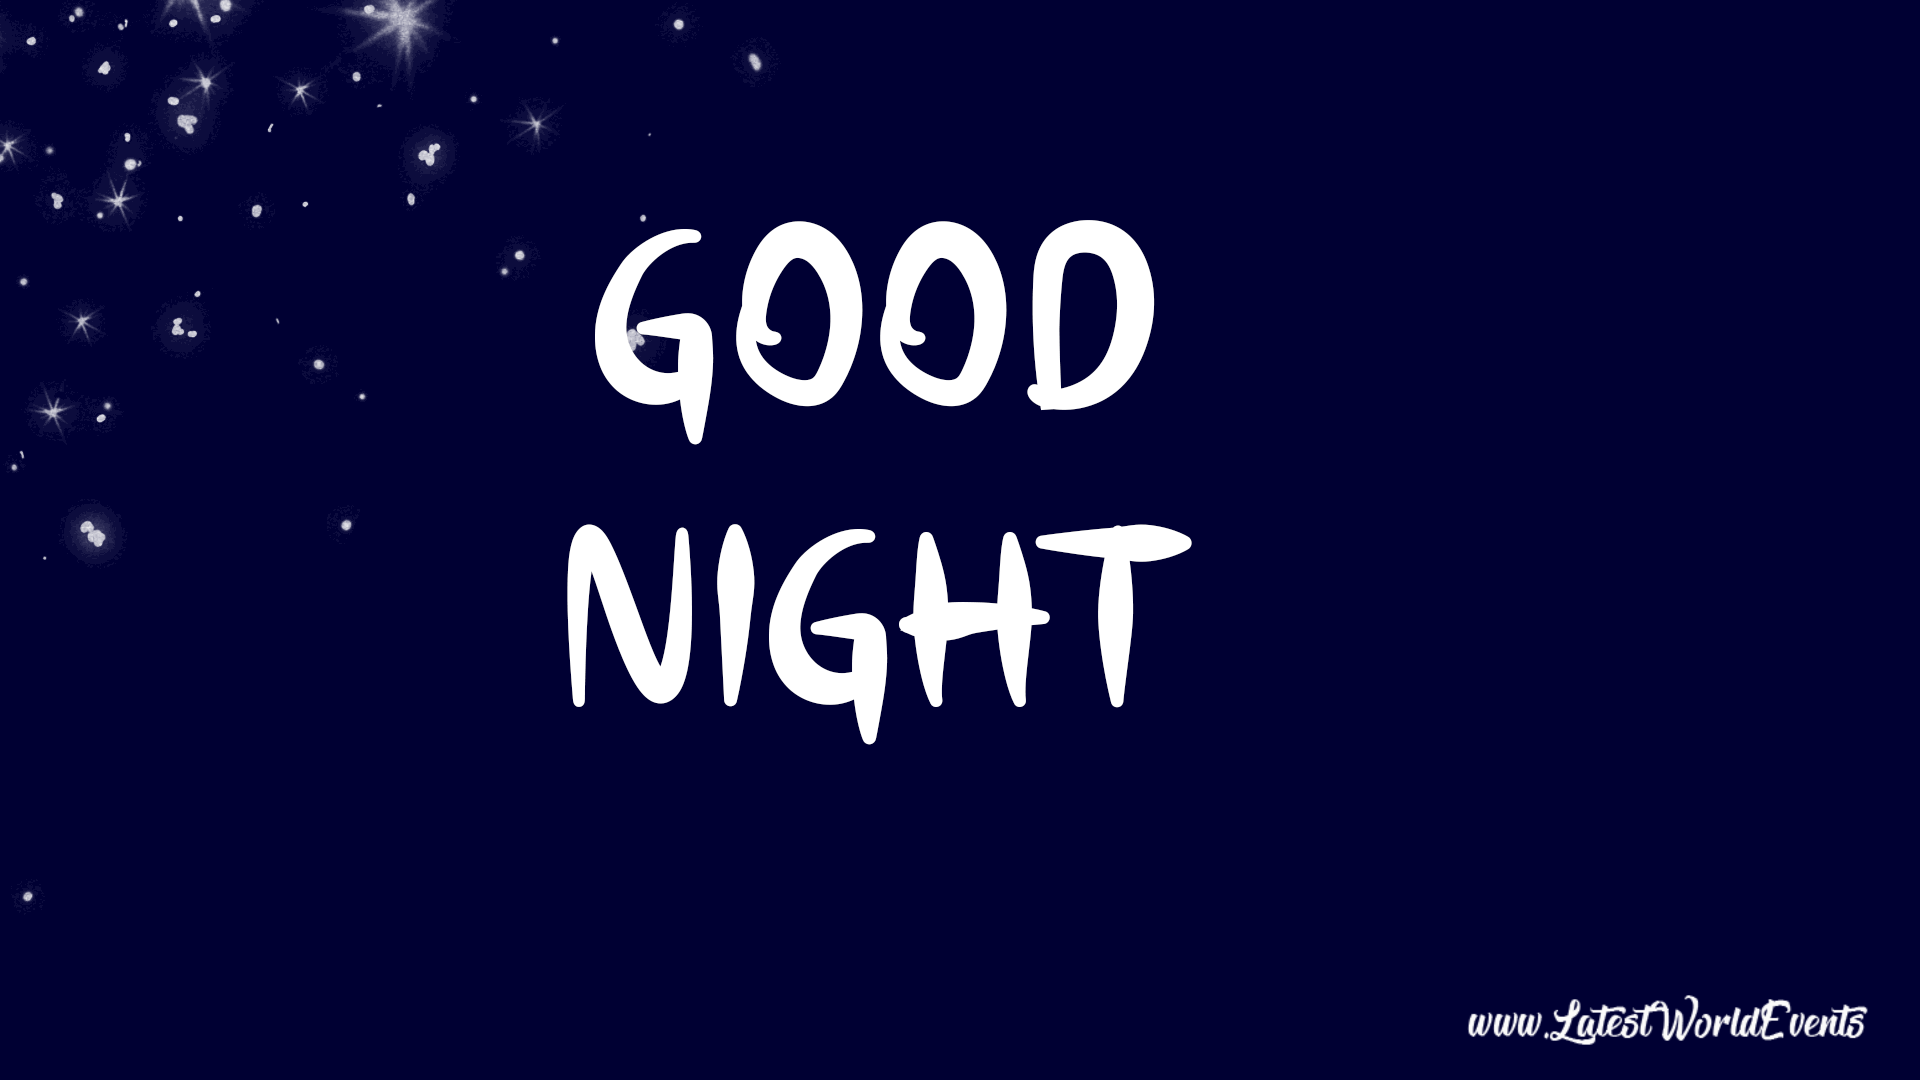 Good Night GIF Wishes Images Messages